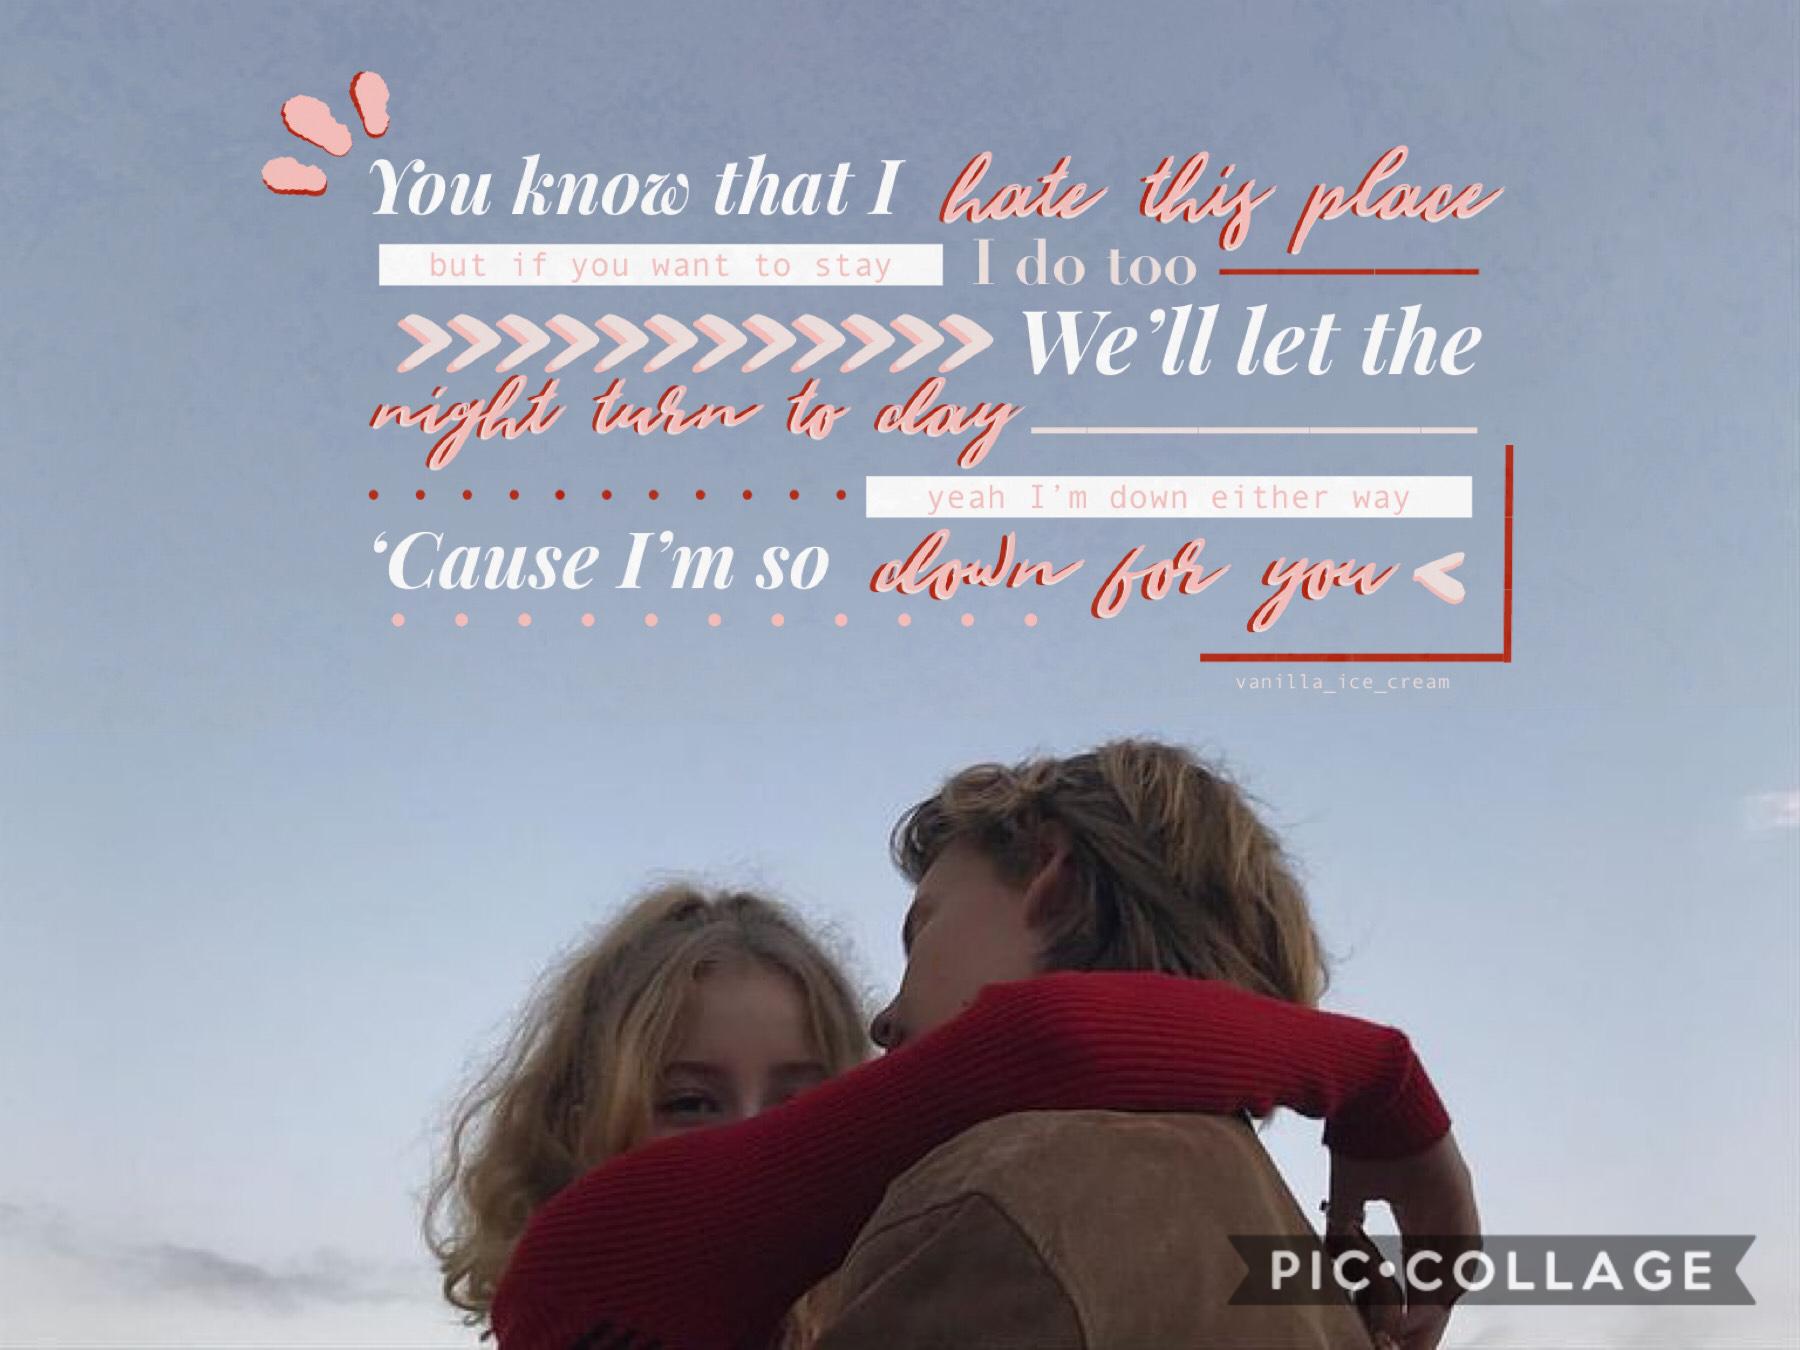 🌹Tap🌹
This makes me feel so single :*).......
Lyrics to ‘down for u’ by Cosmos’ midnight and Ruel❤️ Ahhh I love this song already and it only came out today
